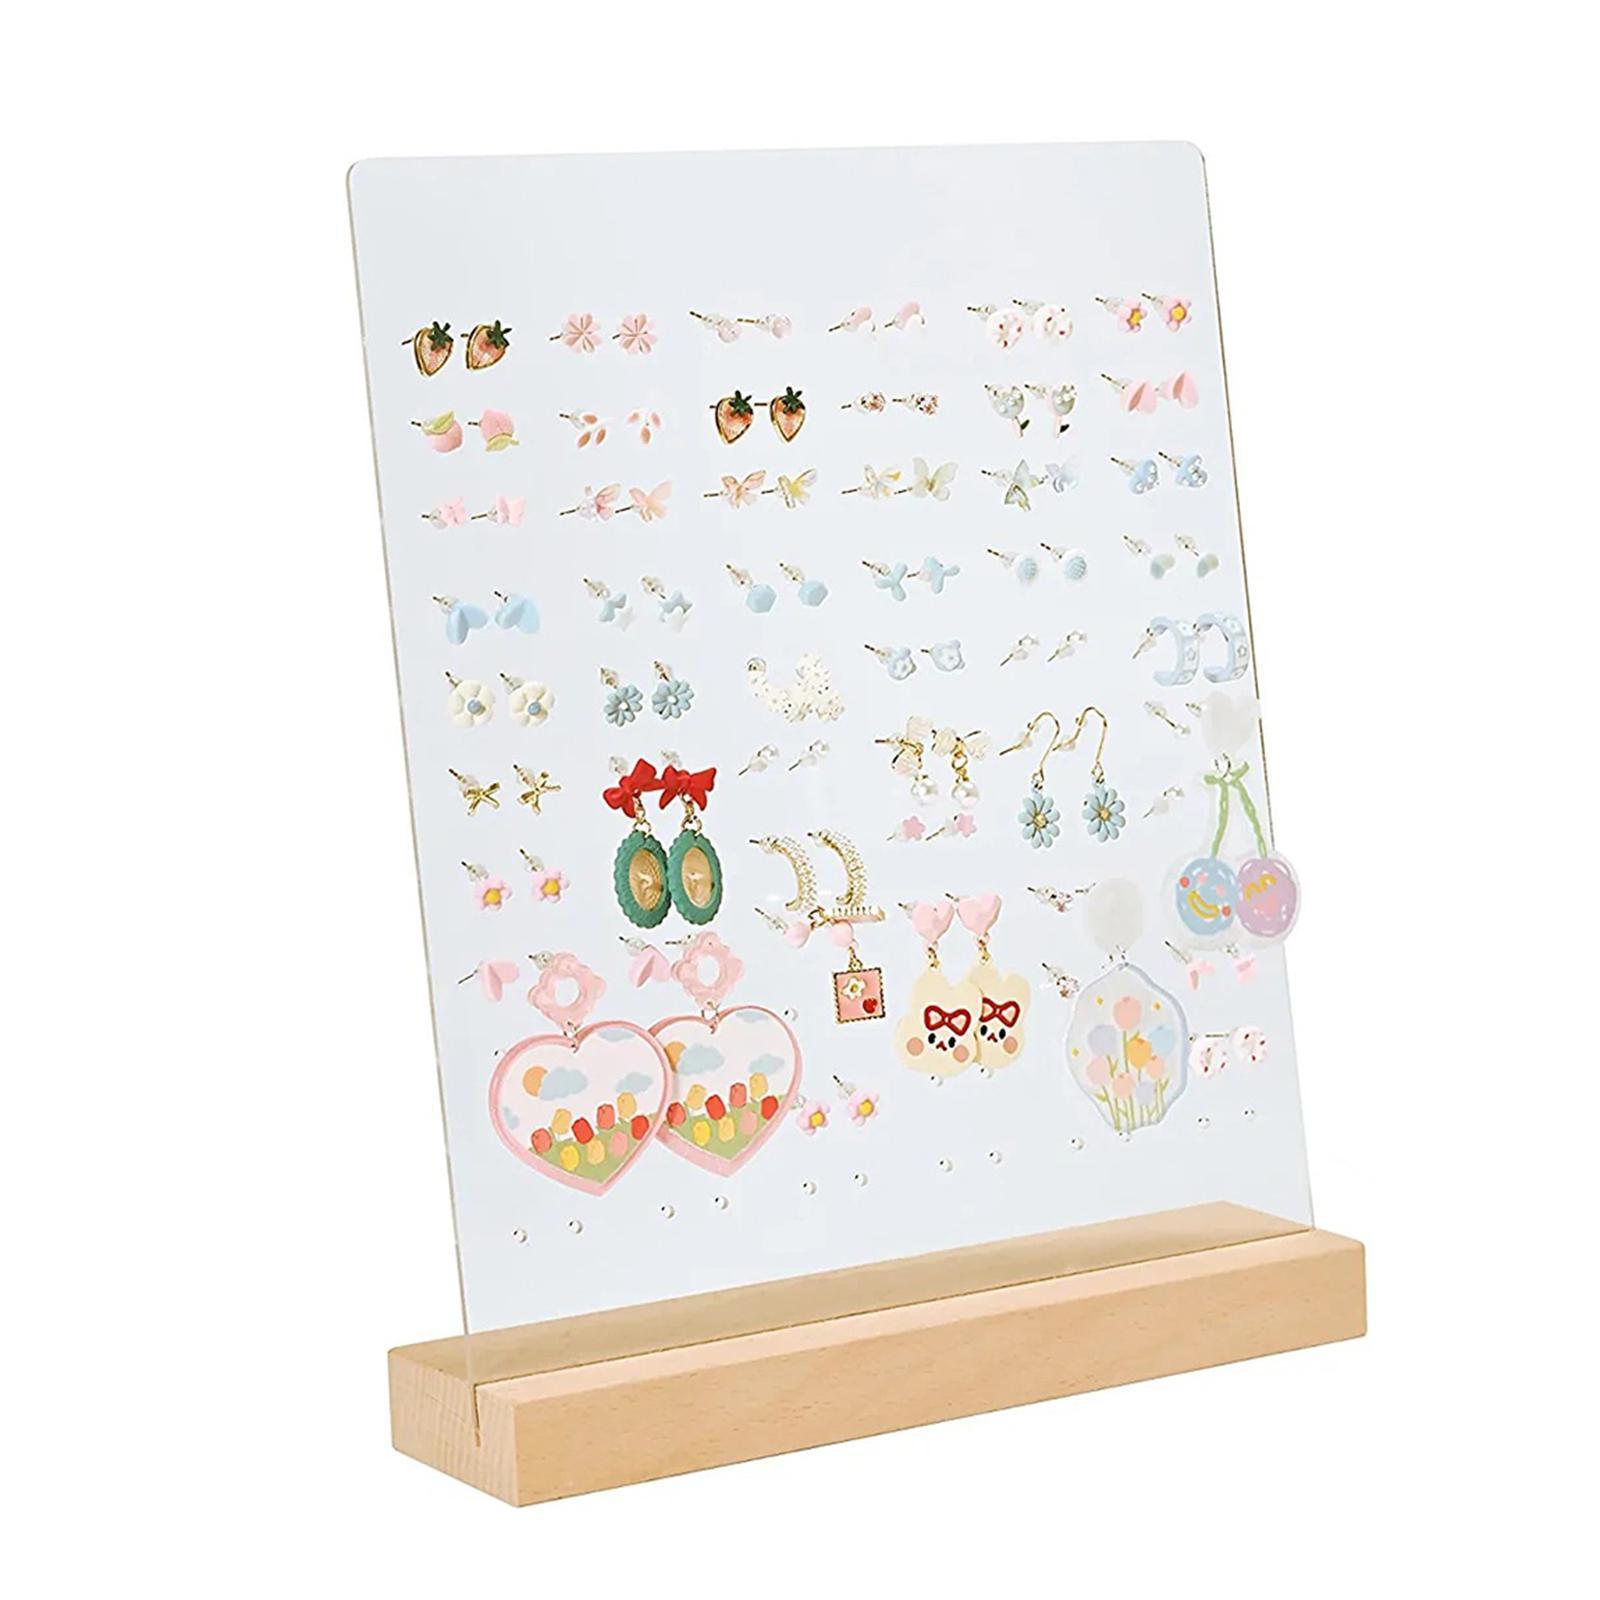 with Base Jewelry Rack Display Organizer Earring Stud Holder Stand for Decor